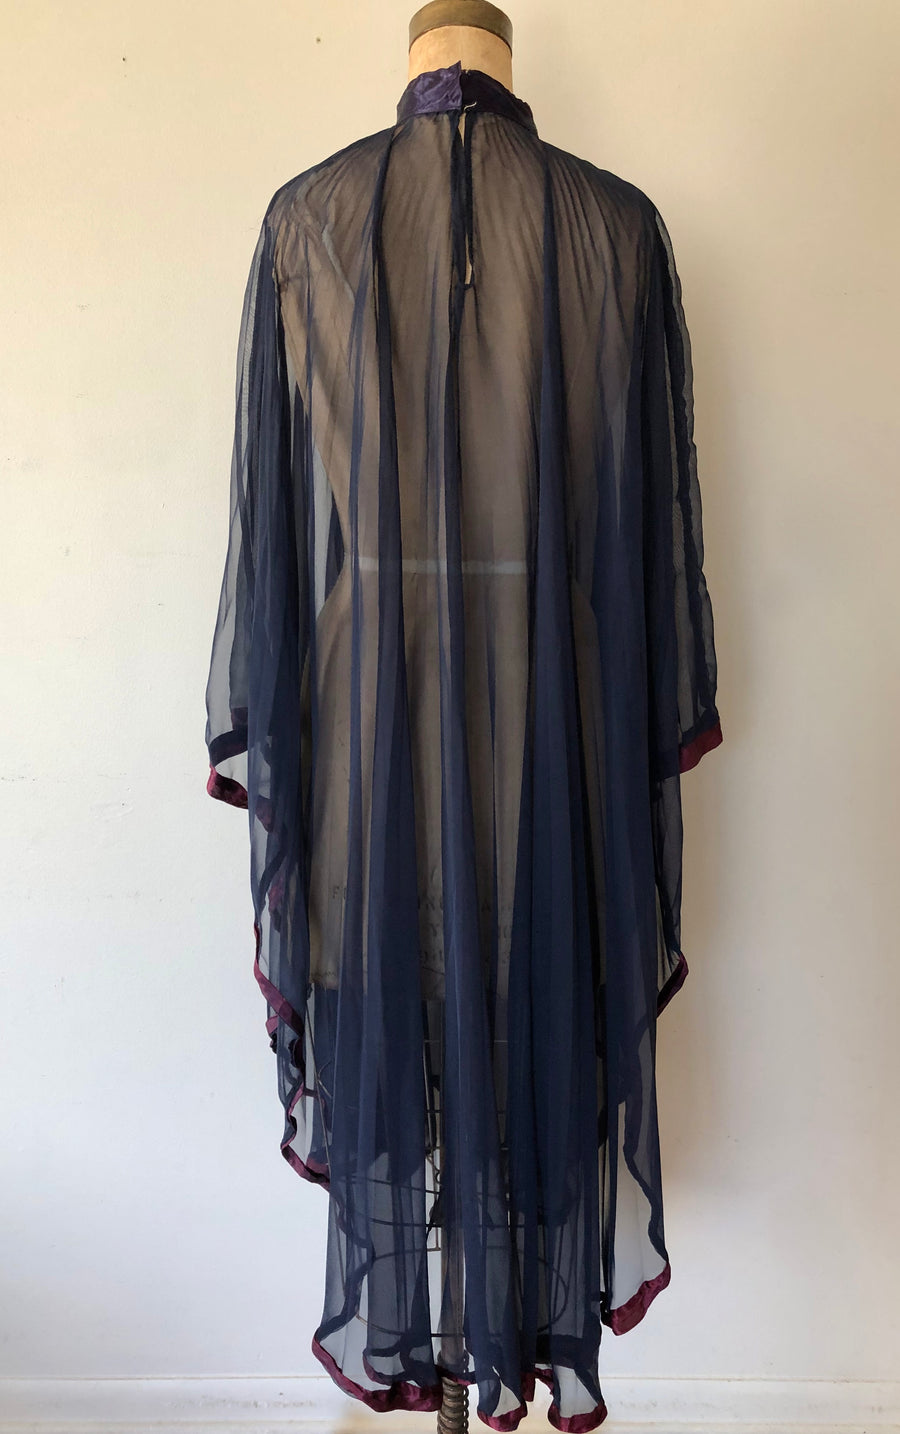 Vintage Navy Sheer Chiffon Cape Overlay - Open Fit